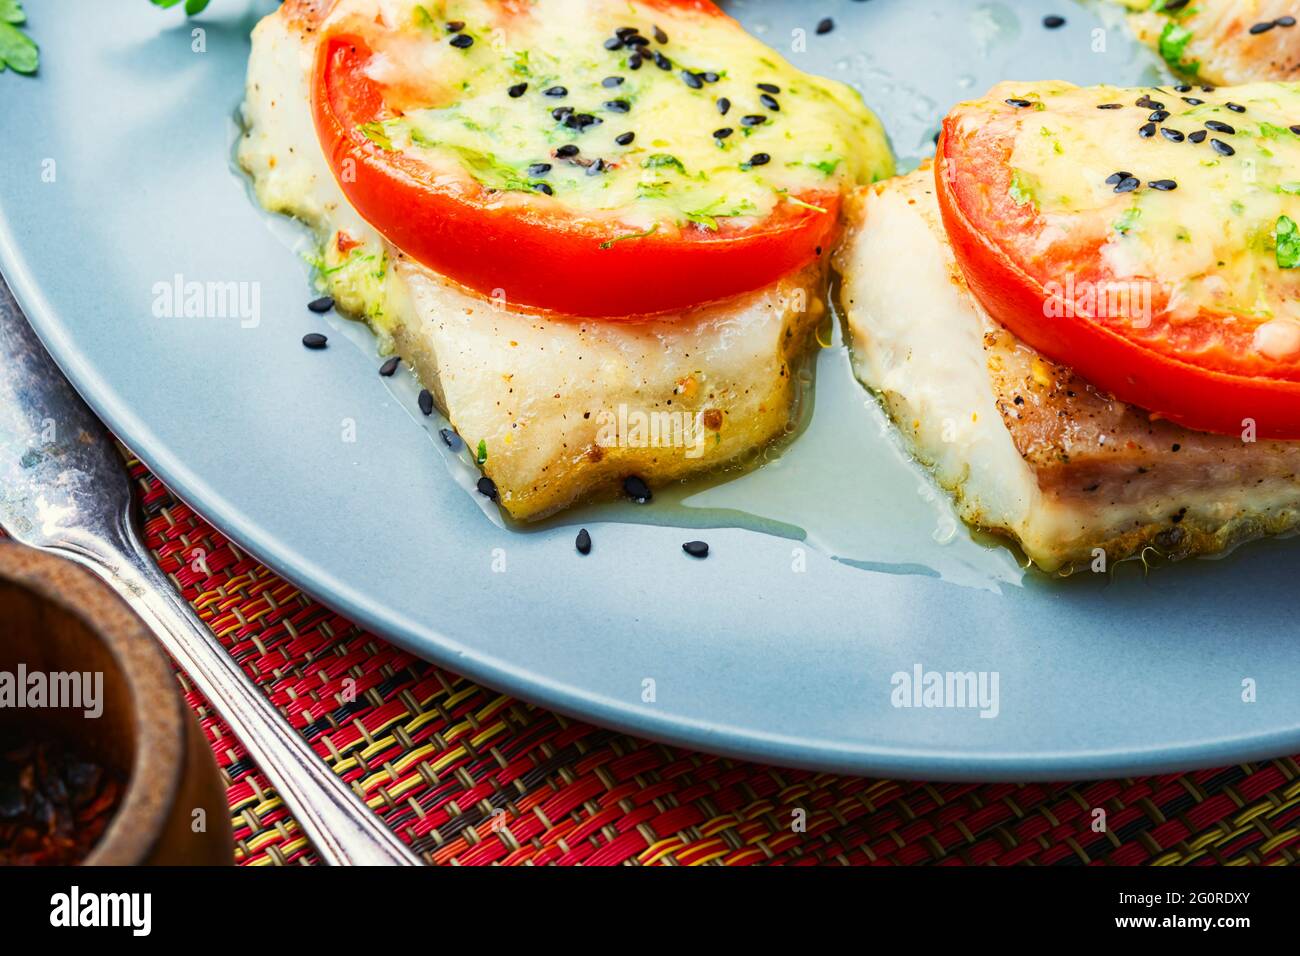 Pangasius fish fillet with vegetables on plate.Healthy dinner. Stock Photo